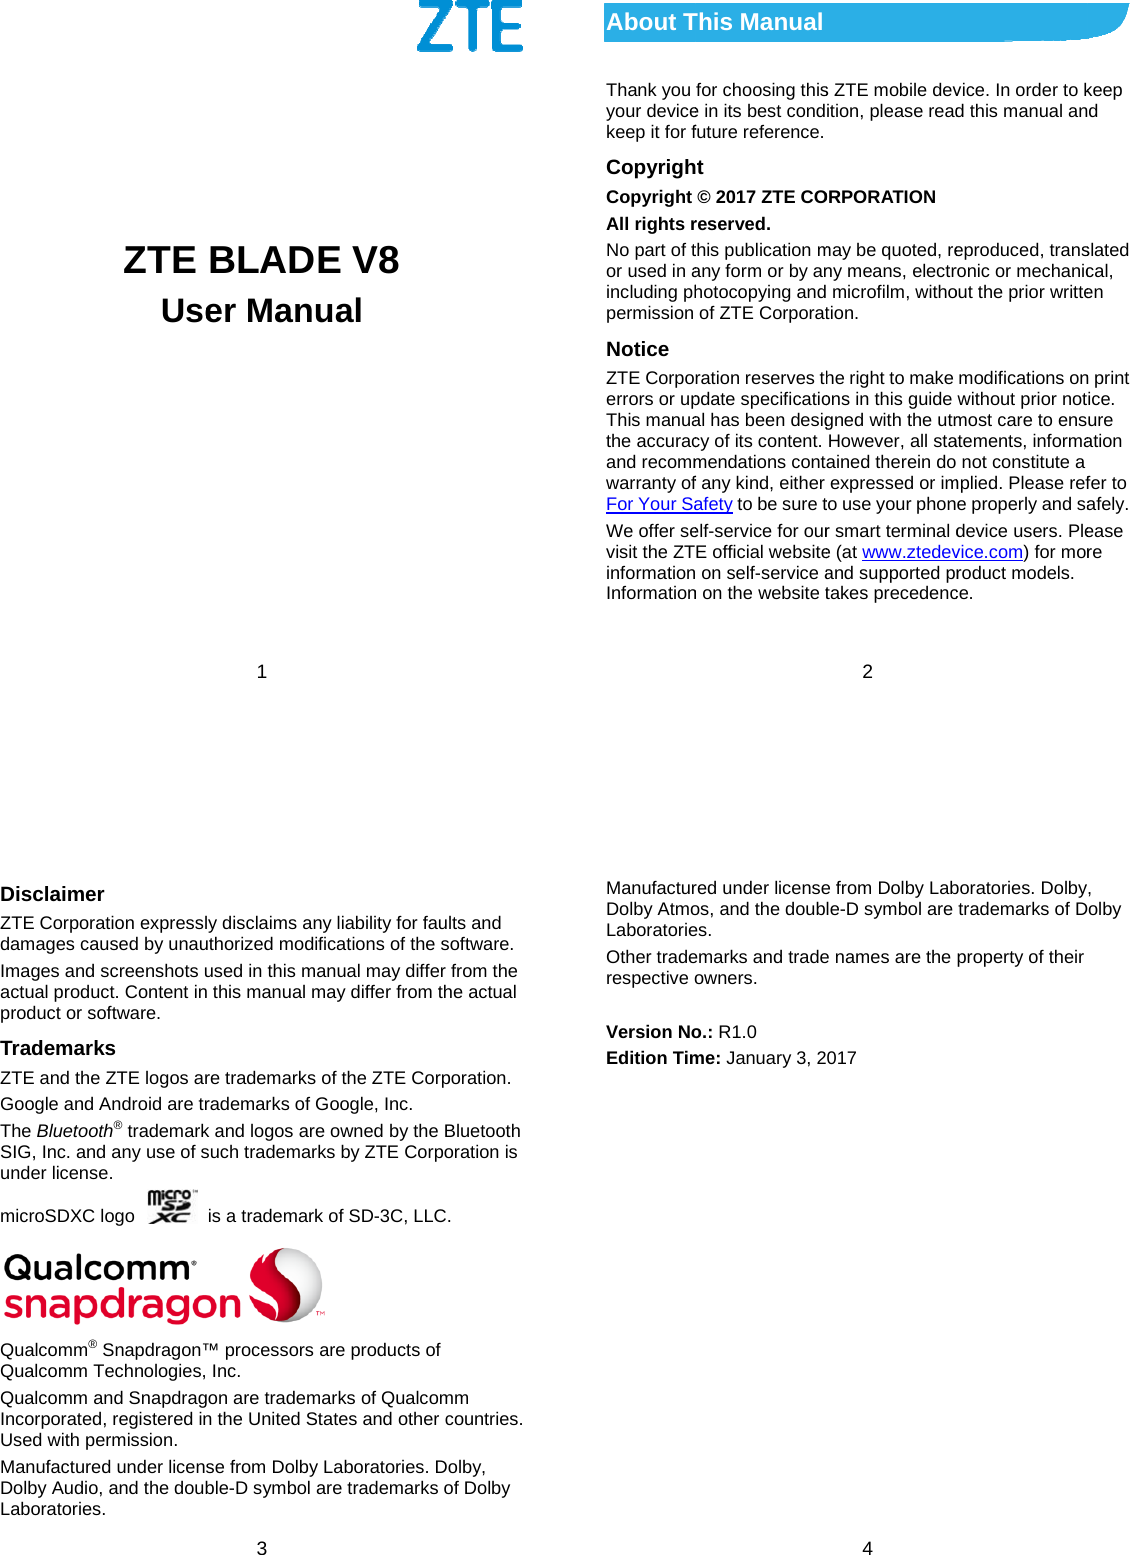     ZTE Use1      BLADEer ManuaE V8 al   About TThank you your devicekeep it for fCopyrighCopyright All rights rNo part of tor used in aincluding phpermission Notice ZTE Corpoerrors or upThis manuathe accuracand recommwarranty ofFor Your SaWe offer sevisit the ZTinformationInformation This Manual for choosing thise in its best condfuture reference. t © 2017 ZTE COreserved. this publication many form or by anhotocopying andof ZTE Corporatration reserves thpdate specificatioal has been desigcy of its content. mendations contf any kind, either afety to be sure telf-service for ourE official website on self-service an on the website t2 s ZTE mobile devition, please readORPORATION may be quoted, reny means, electr microfilm, withotion. he right to make ons in this guide gned with the utmHowever, all staained therein do expressed or imto use your phonr smart terminal de (at www.ztedevand supported prtakes precedencvice. In order to kd this manual aneproduced, transronic or mechanicout the prior writtemodifications onwithout prior notmost care to ensatements, informanot constitute a mplied. Please refe properly and sadevice users. Plevice.com) for morroduct models. ce. keep d slated cal, en n print ice. ure ation fer to afely. ease re  3 Disclaimer ZTE Corporation expressly disclaims any liability for faults and damages caused by unauthorized modifications of the software. Images and screenshots used in this manual may differ from the actual product. Content in this manual may differ from the actual product or software. Trademarks ZTE and the ZTE logos are trademarks of the ZTE Corporation. Google and Android are trademarks of Google, Inc. The Bluetooth® trademark and logos are owned by the Bluetooth SIG, Inc. and any use of such trademarks by ZTE Corporation is under license. microSDXC logo    is a trademark of SD-3C, LLC.       Qualcomm® Snapdragon™ processors are products of Qualcomm Technologies, Inc.   Qualcomm and Snapdragon are trademarks of Qualcomm Incorporated, registered in the United States and other countries. Used with permission. Manufactured under license from Dolby Laboratories. Dolby, Dolby Audio, and the double-D symbol are trademarks of Dolby Laboratories.  4 Manufactured under license from Dolby Laboratories. Dolby, Dolby Atmos, and the double-D symbol are trademarks of Dolby Laboratories. Other trademarks and trade names are the property of their respective owners.  Version No.: R1.0 Edition Time: January 3, 2017  